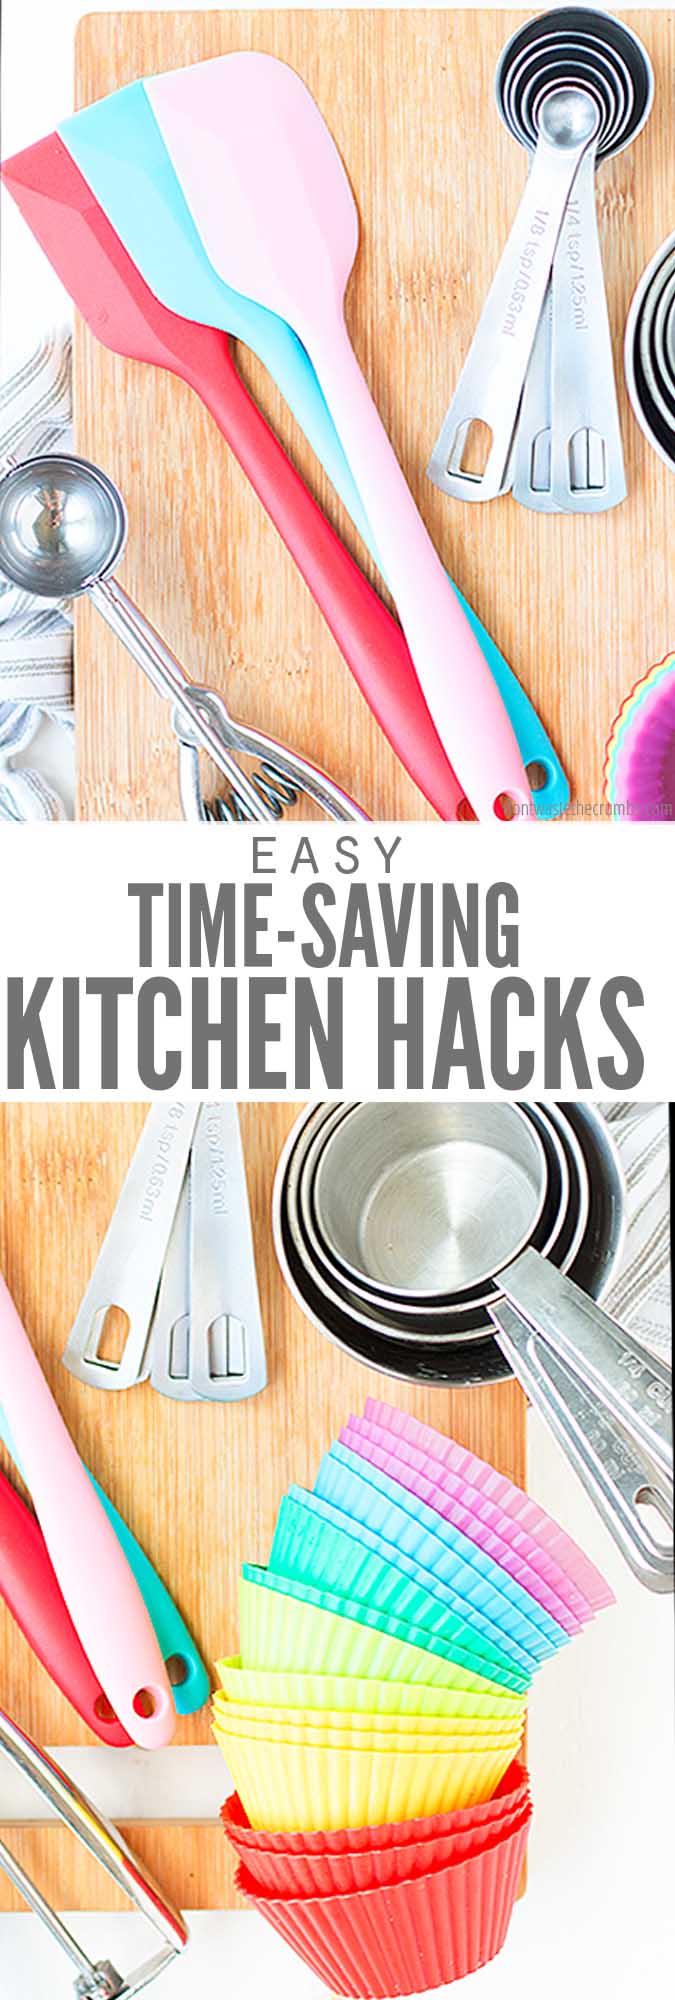 From a real mom, tried and true time-saving kitchen hacks will help to make your day run smoother and save you precious minutes off each hour!